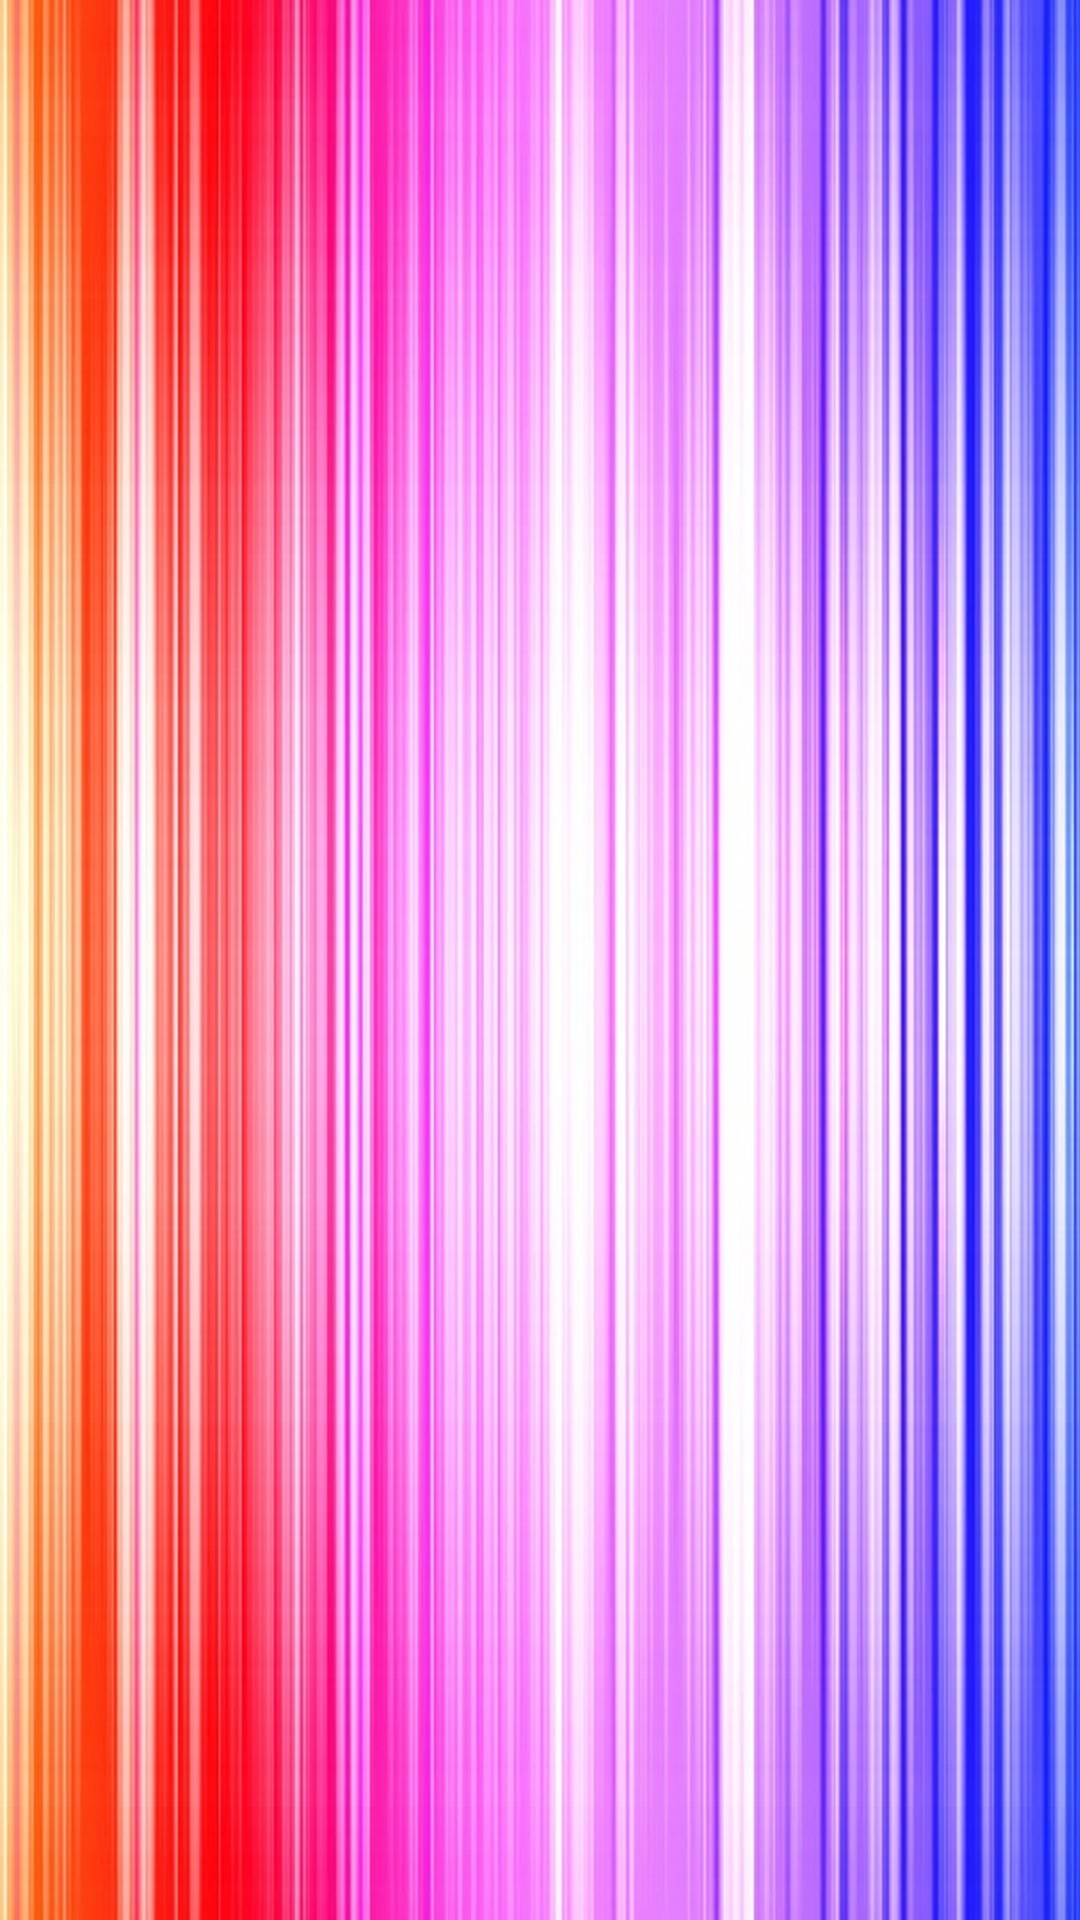 Wallpaper Rainbow Colors Android with resolution 1080X1920 pixel. You can make this wallpaper for your Android backgrounds, Tablet, Smartphones Screensavers and Mobile Phone Lock Screen